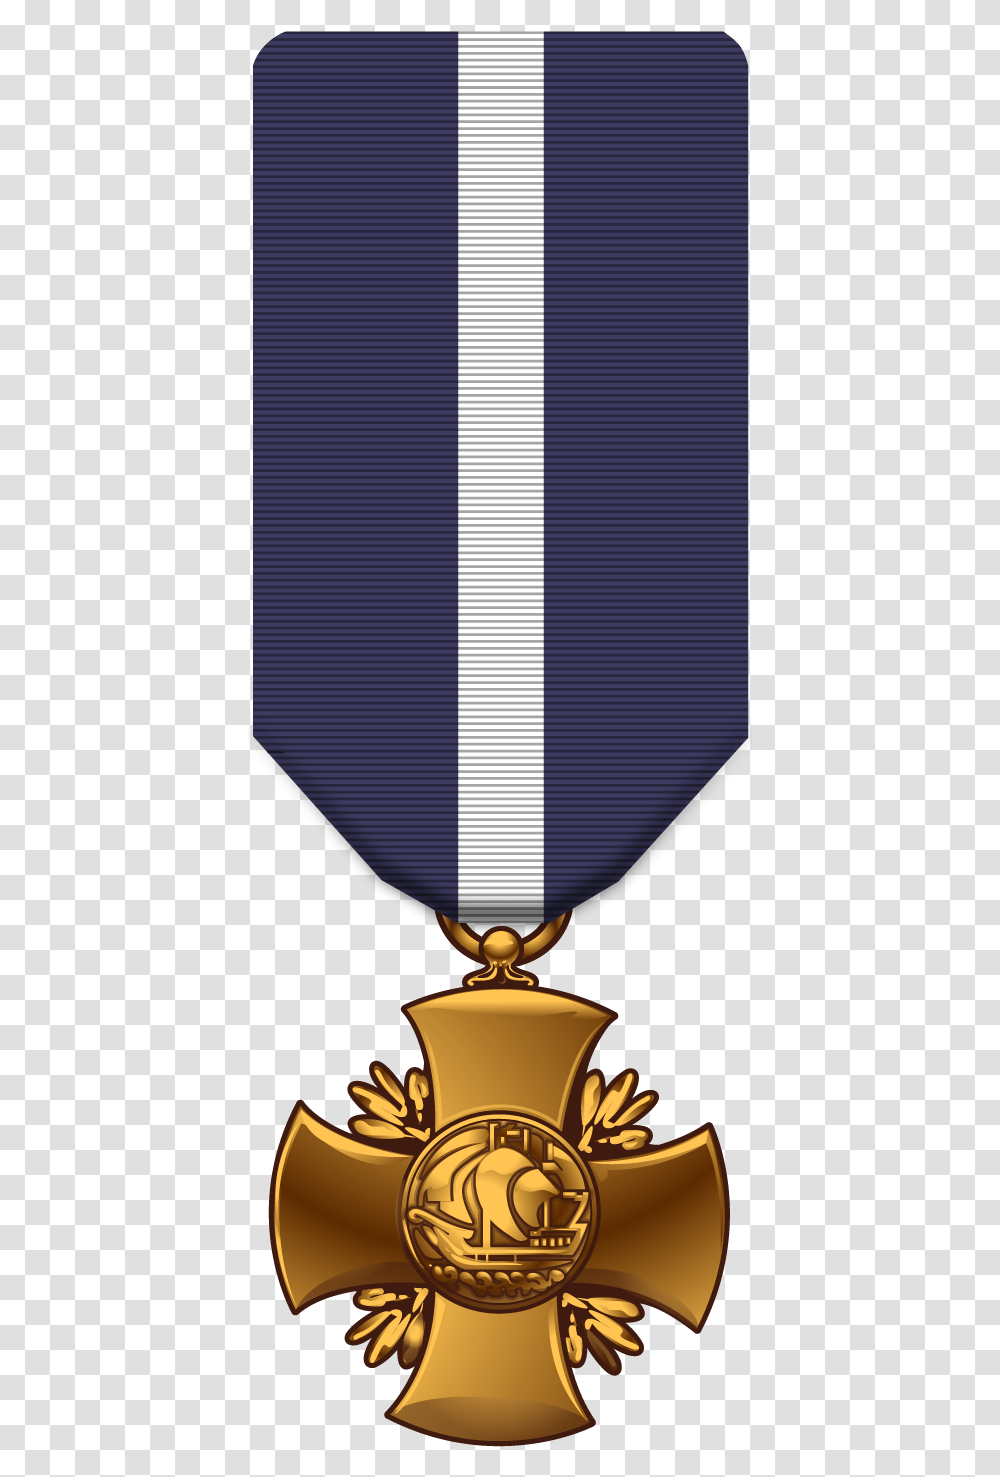 Library Of Purple Heart Medal Jpg Royalty Free Stock Ca Navy Cross Medal, Lamp, Armor, Aircraft, Vehicle Transparent Png